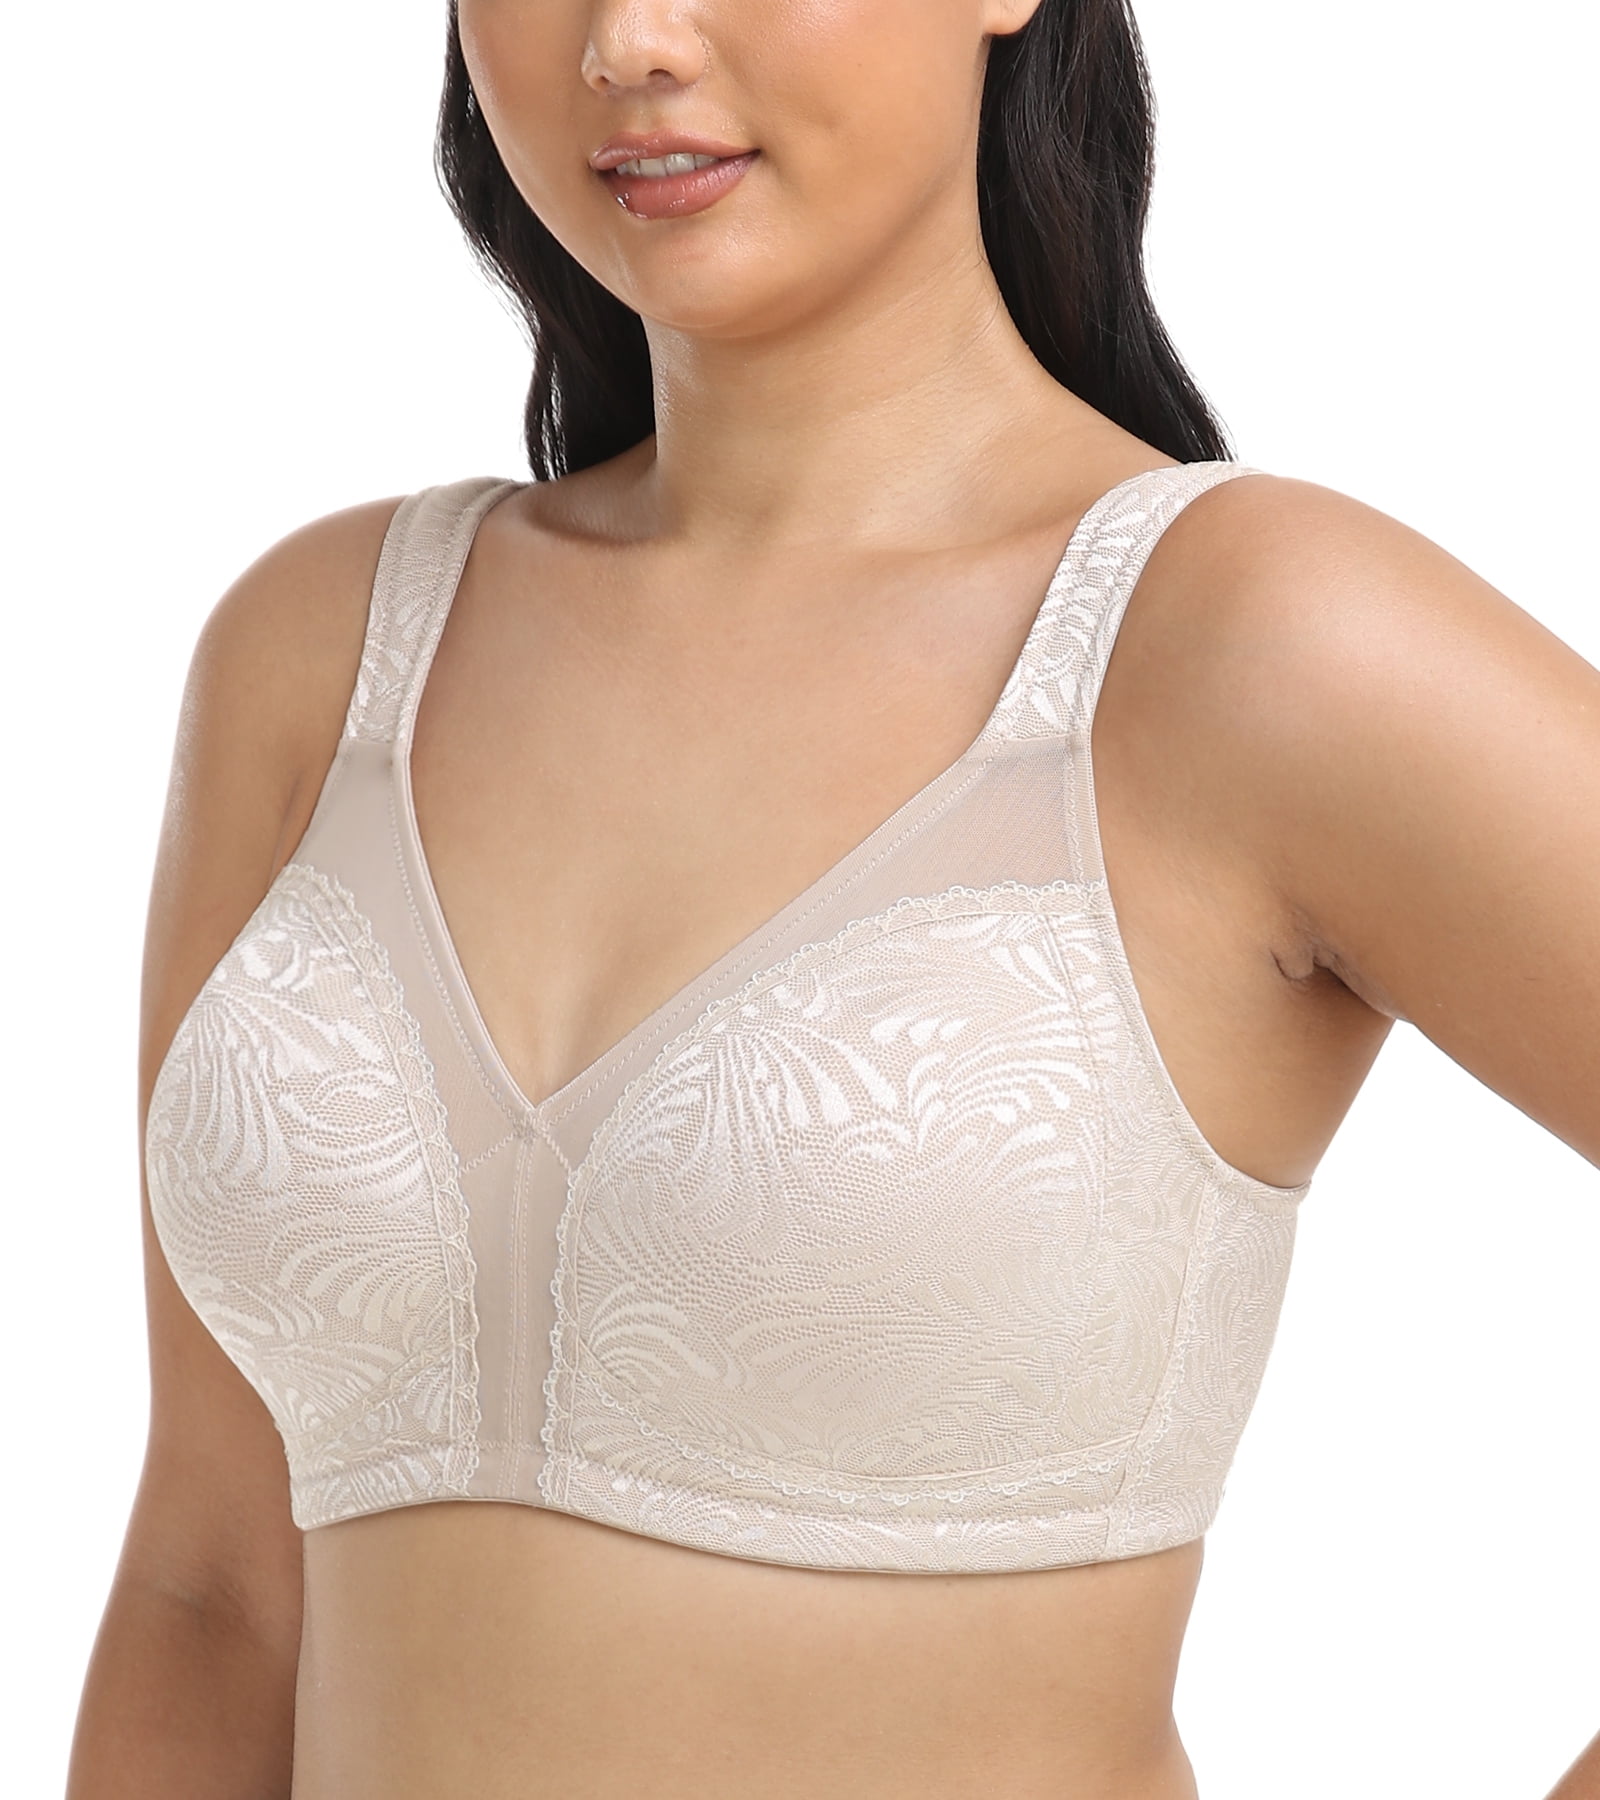 Exclare Women's Full Coverage Plus Size Comfort Double Support Unpadded  Wirefree Minimizer Bra (40G, Pink)